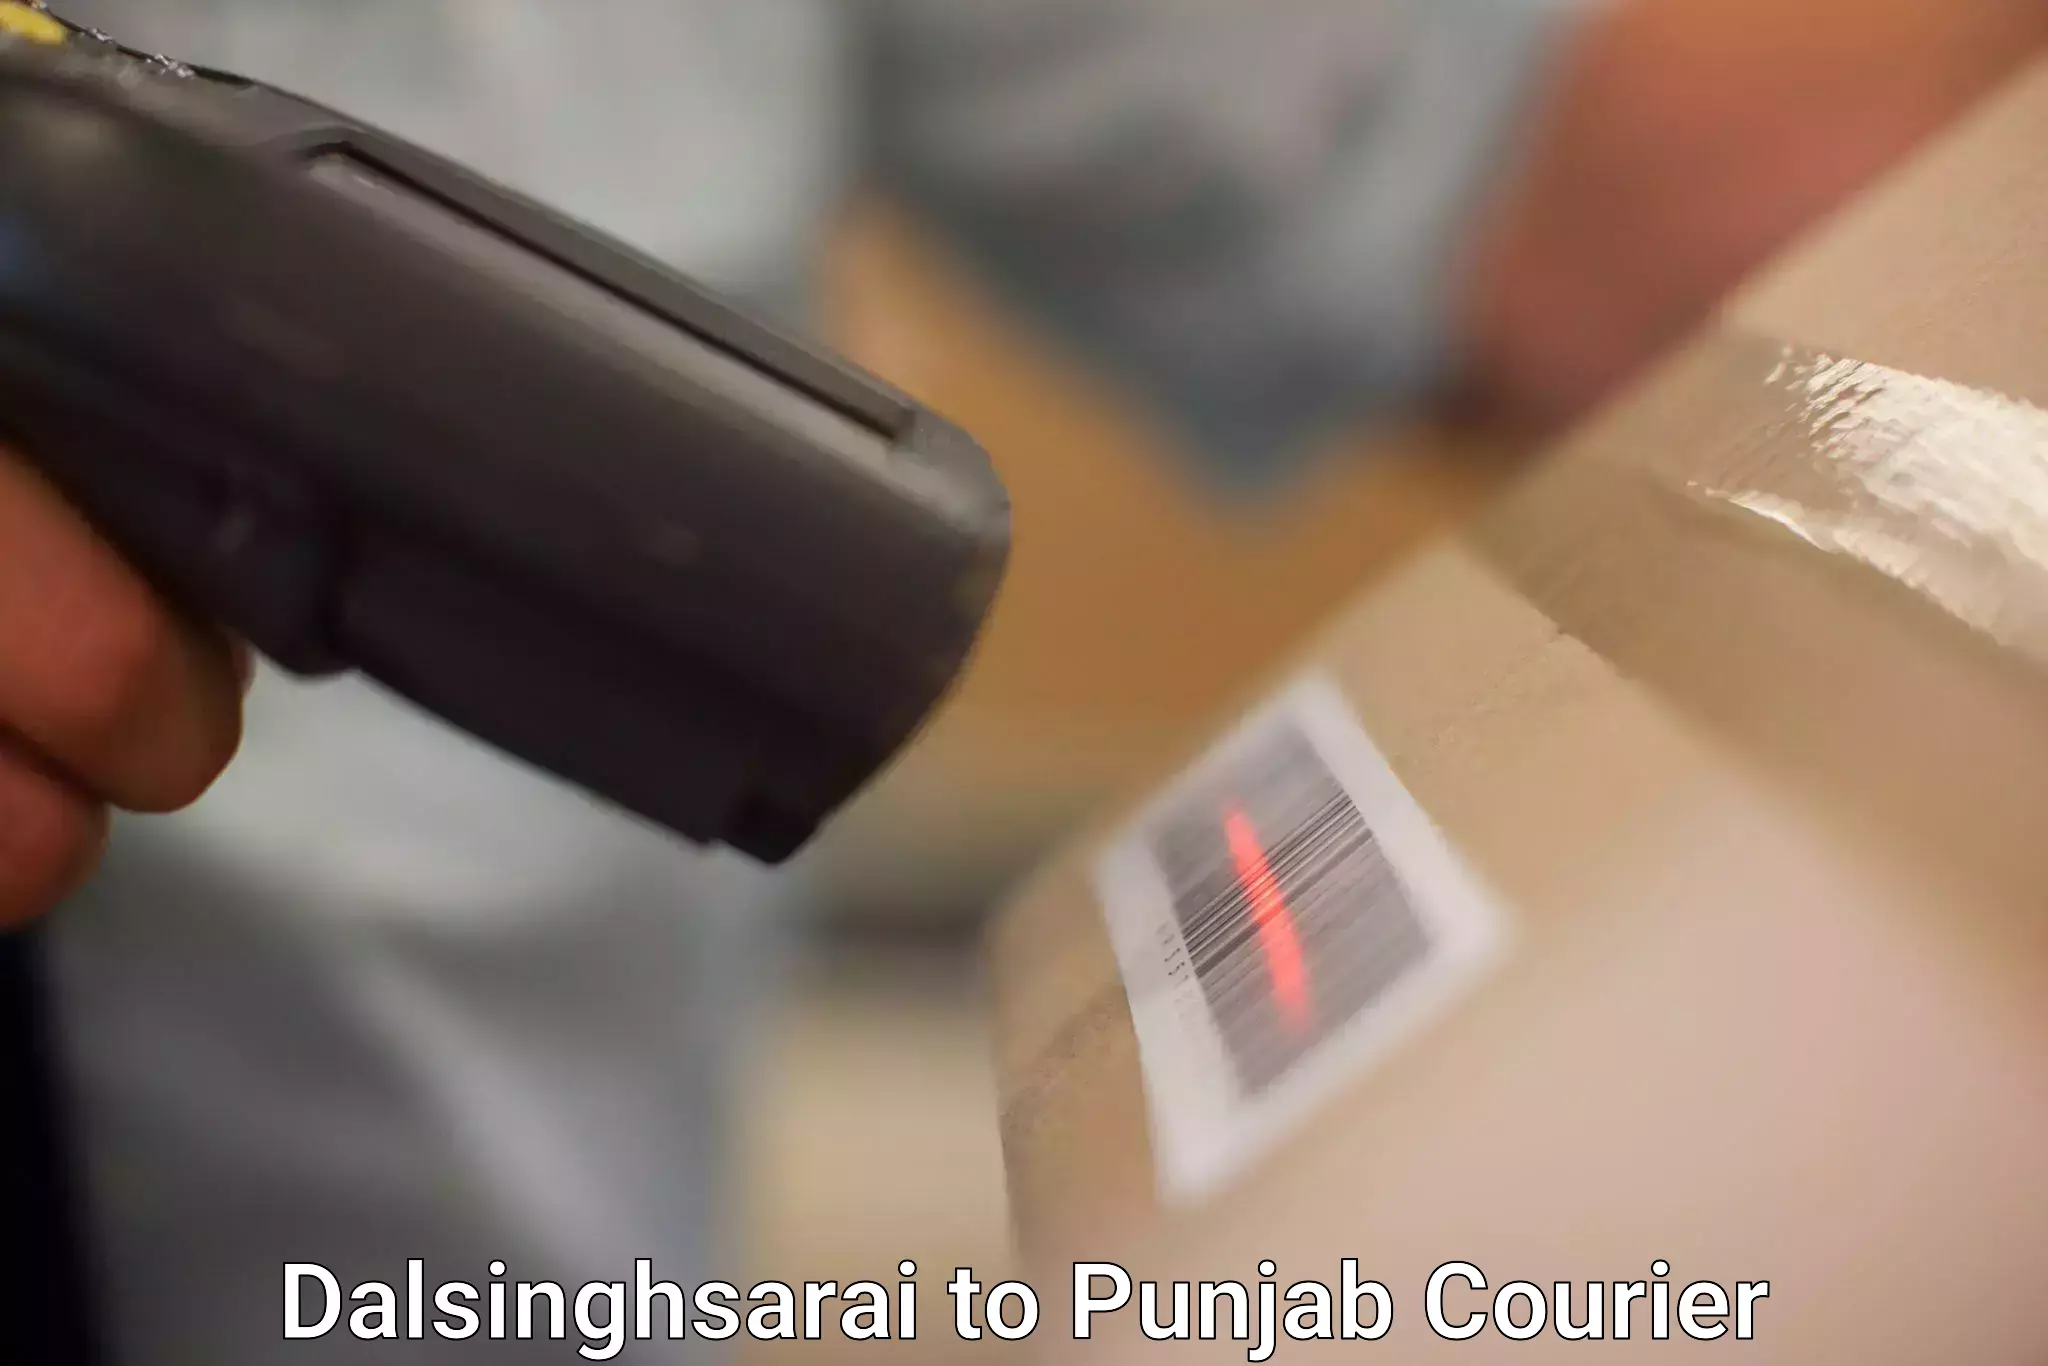 Same-day delivery options Dalsinghsarai to Bathinda